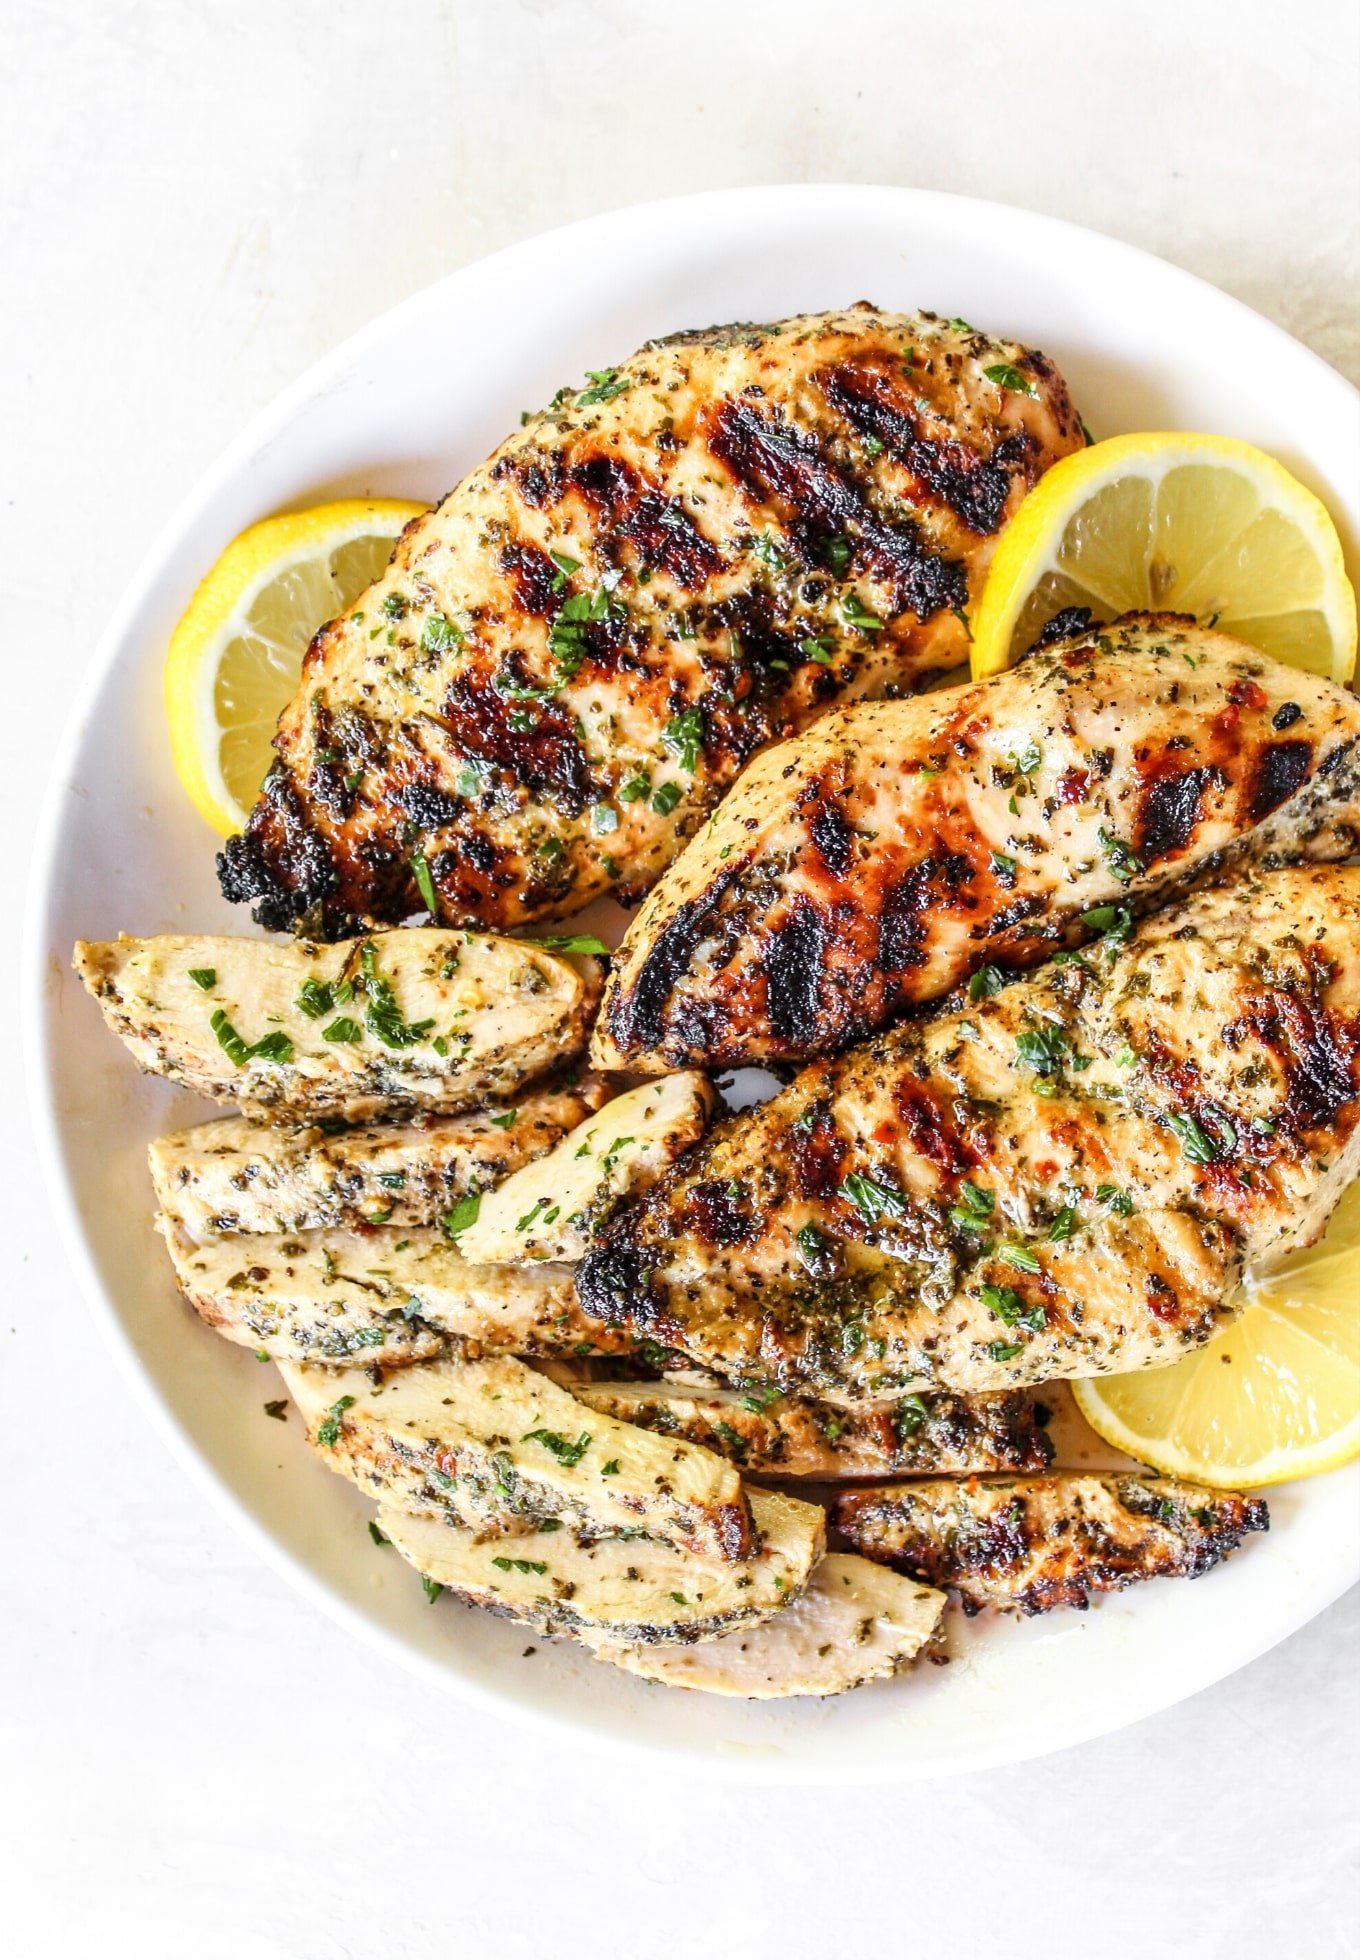 https://thewholecook.com/wp-content/uploads/2020/05/Lemon-Herb-Grilled-Chicken-by-The-Whole-Cook-vertical.jpg